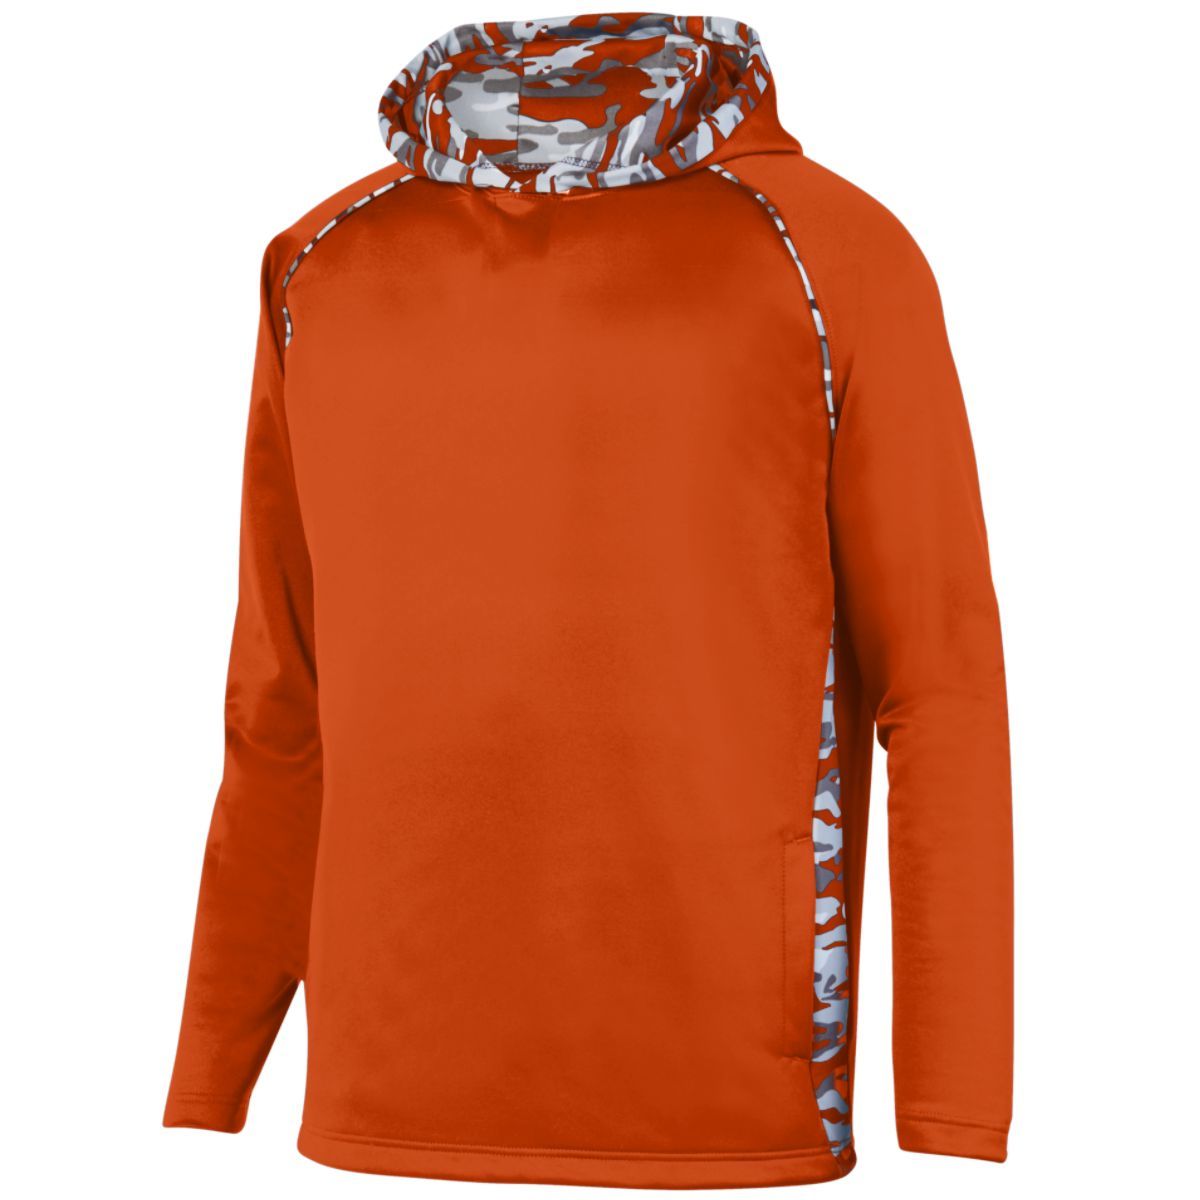 Augusta Sportswear Youth Mod Camo Hoodie in Orange/Orange Mod  -Part of the Youth, Youth-Hoodie, Hoodies, Augusta-Products product lines at KanaleyCreations.com